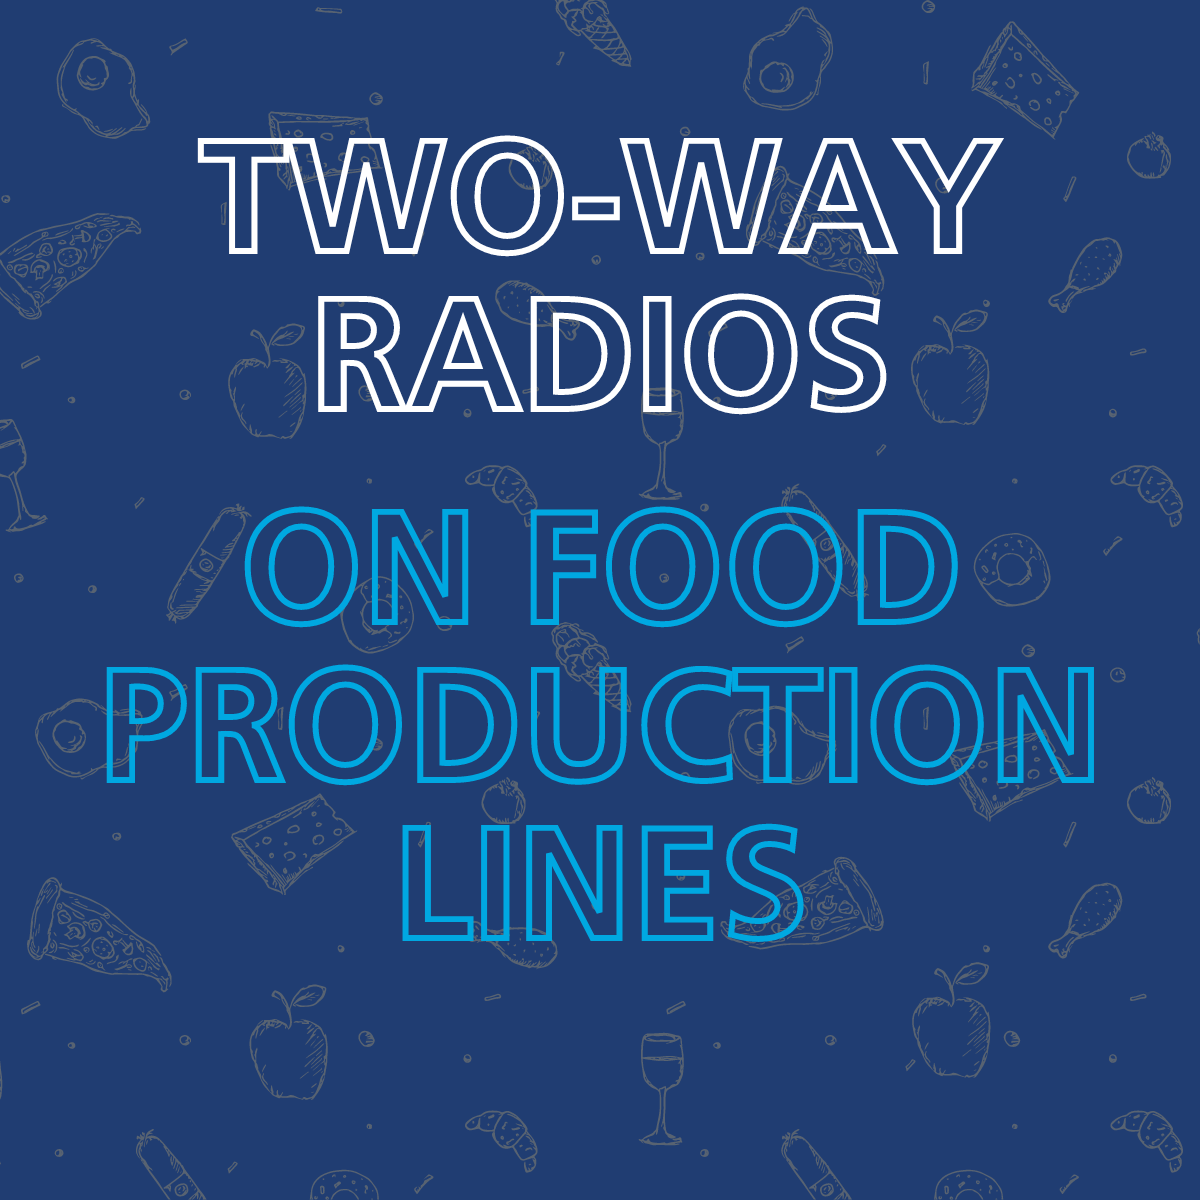 How Two-Way Radios Enhance Safety On Food Production Lines